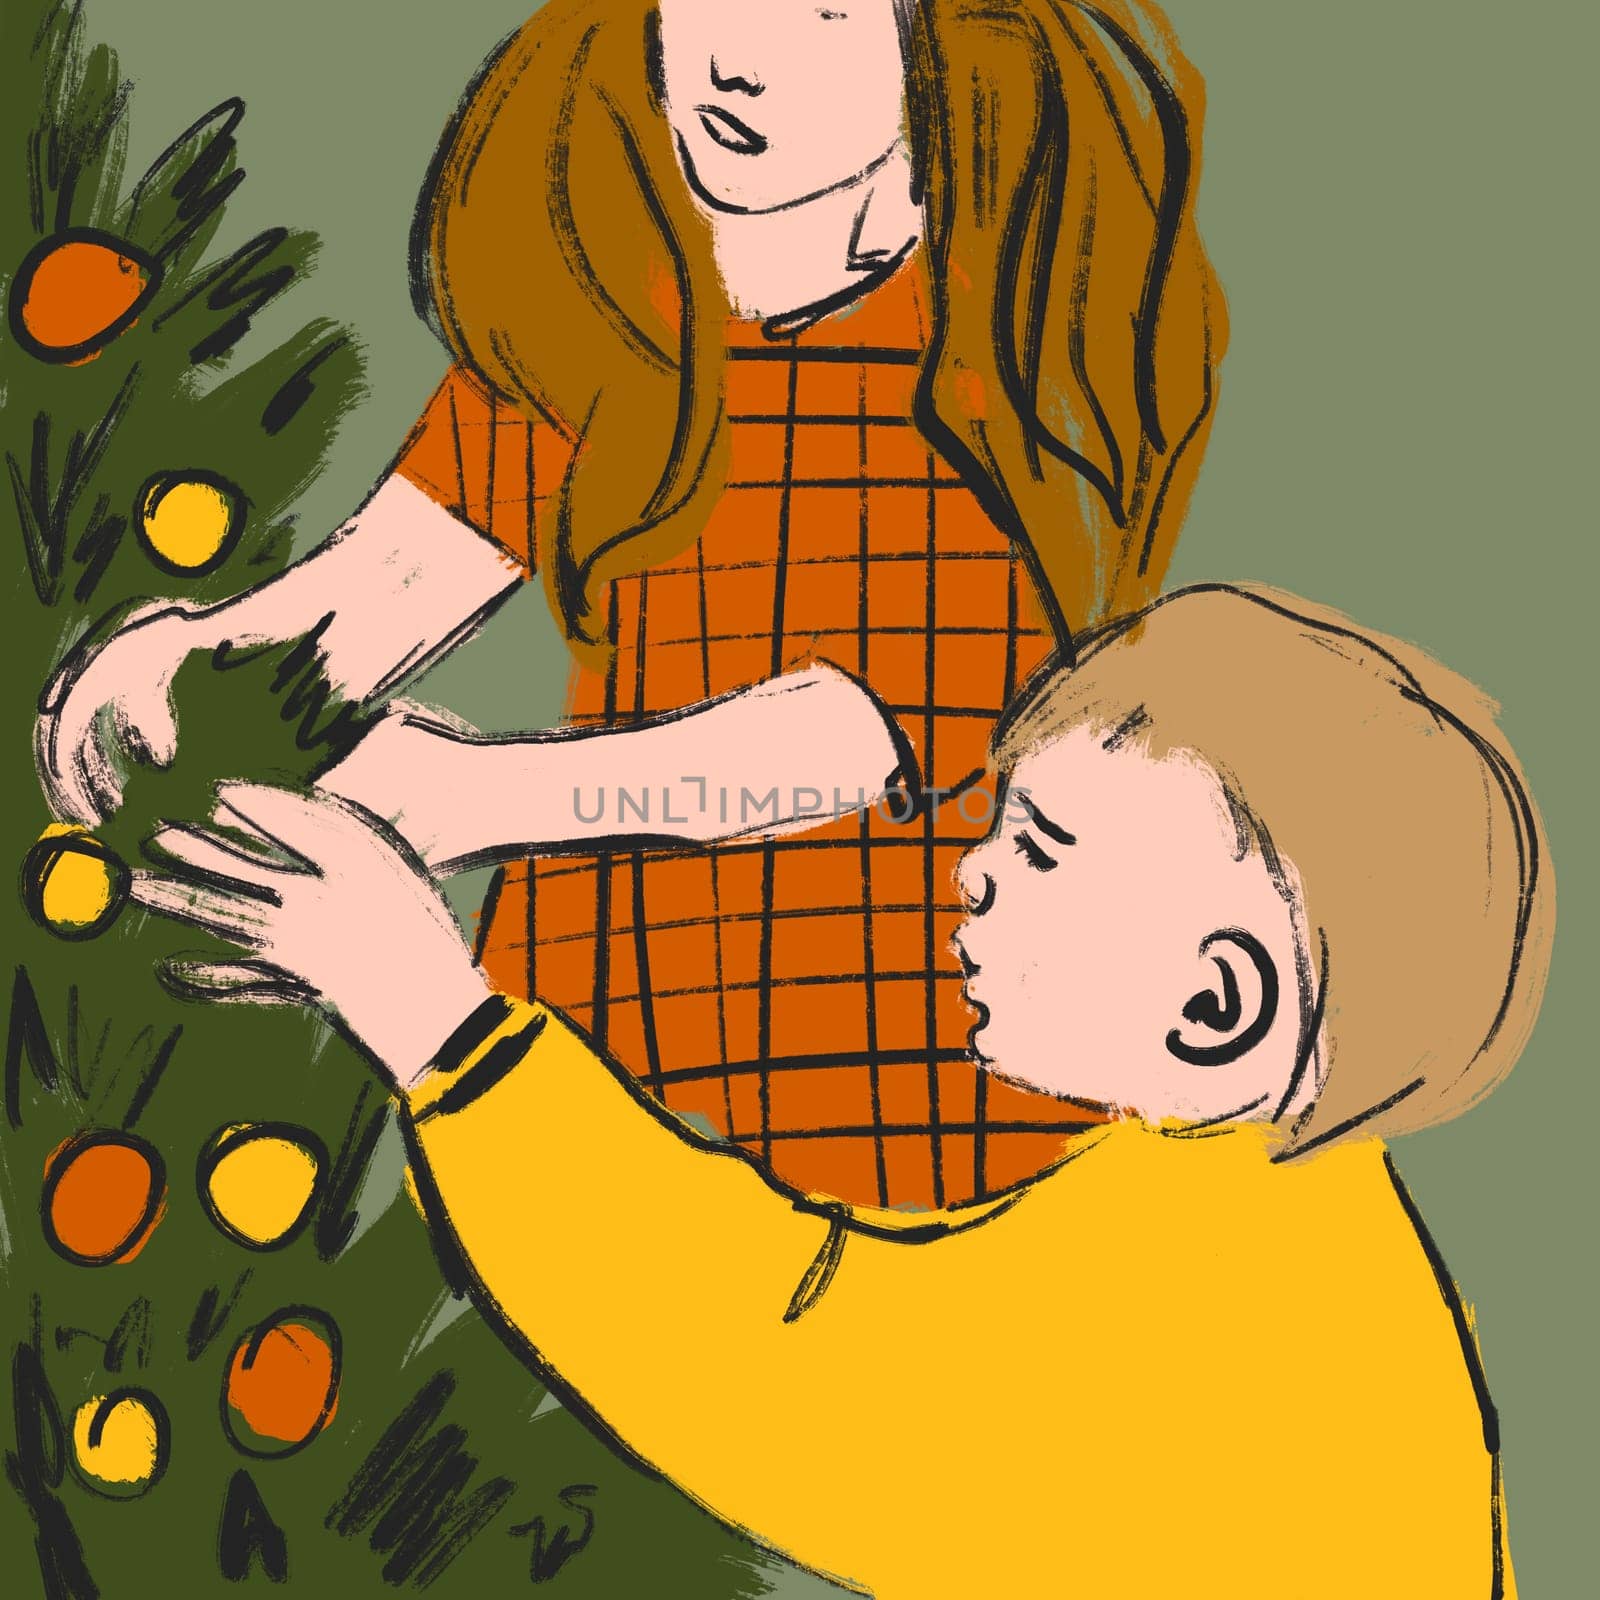 Hand drawn illustration of mother and boy child decorating Christmas tree. Family together on holiday, loved ones, emotional reunion of family members. Modern contemporary sketch style print in yellow green orange colors. Pine tree with baubles decorations, winter festive time. by Lagmar